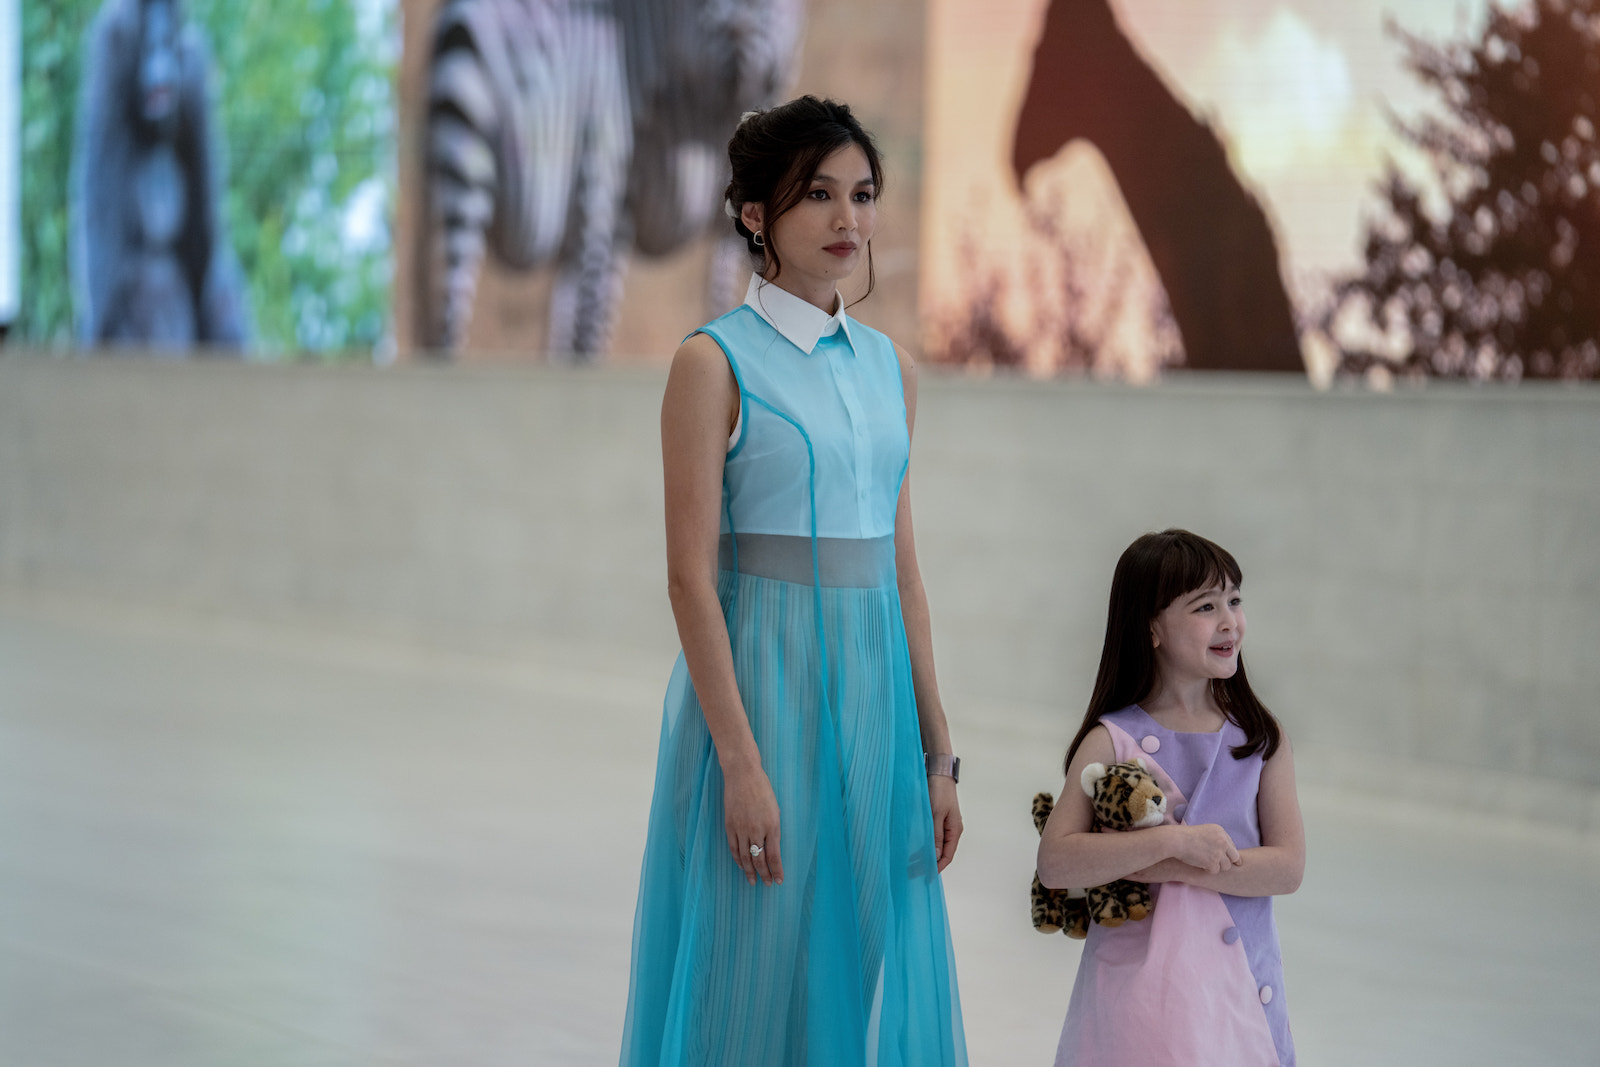 a woman in a blue dress standing with a young girl holding a stuffed animal